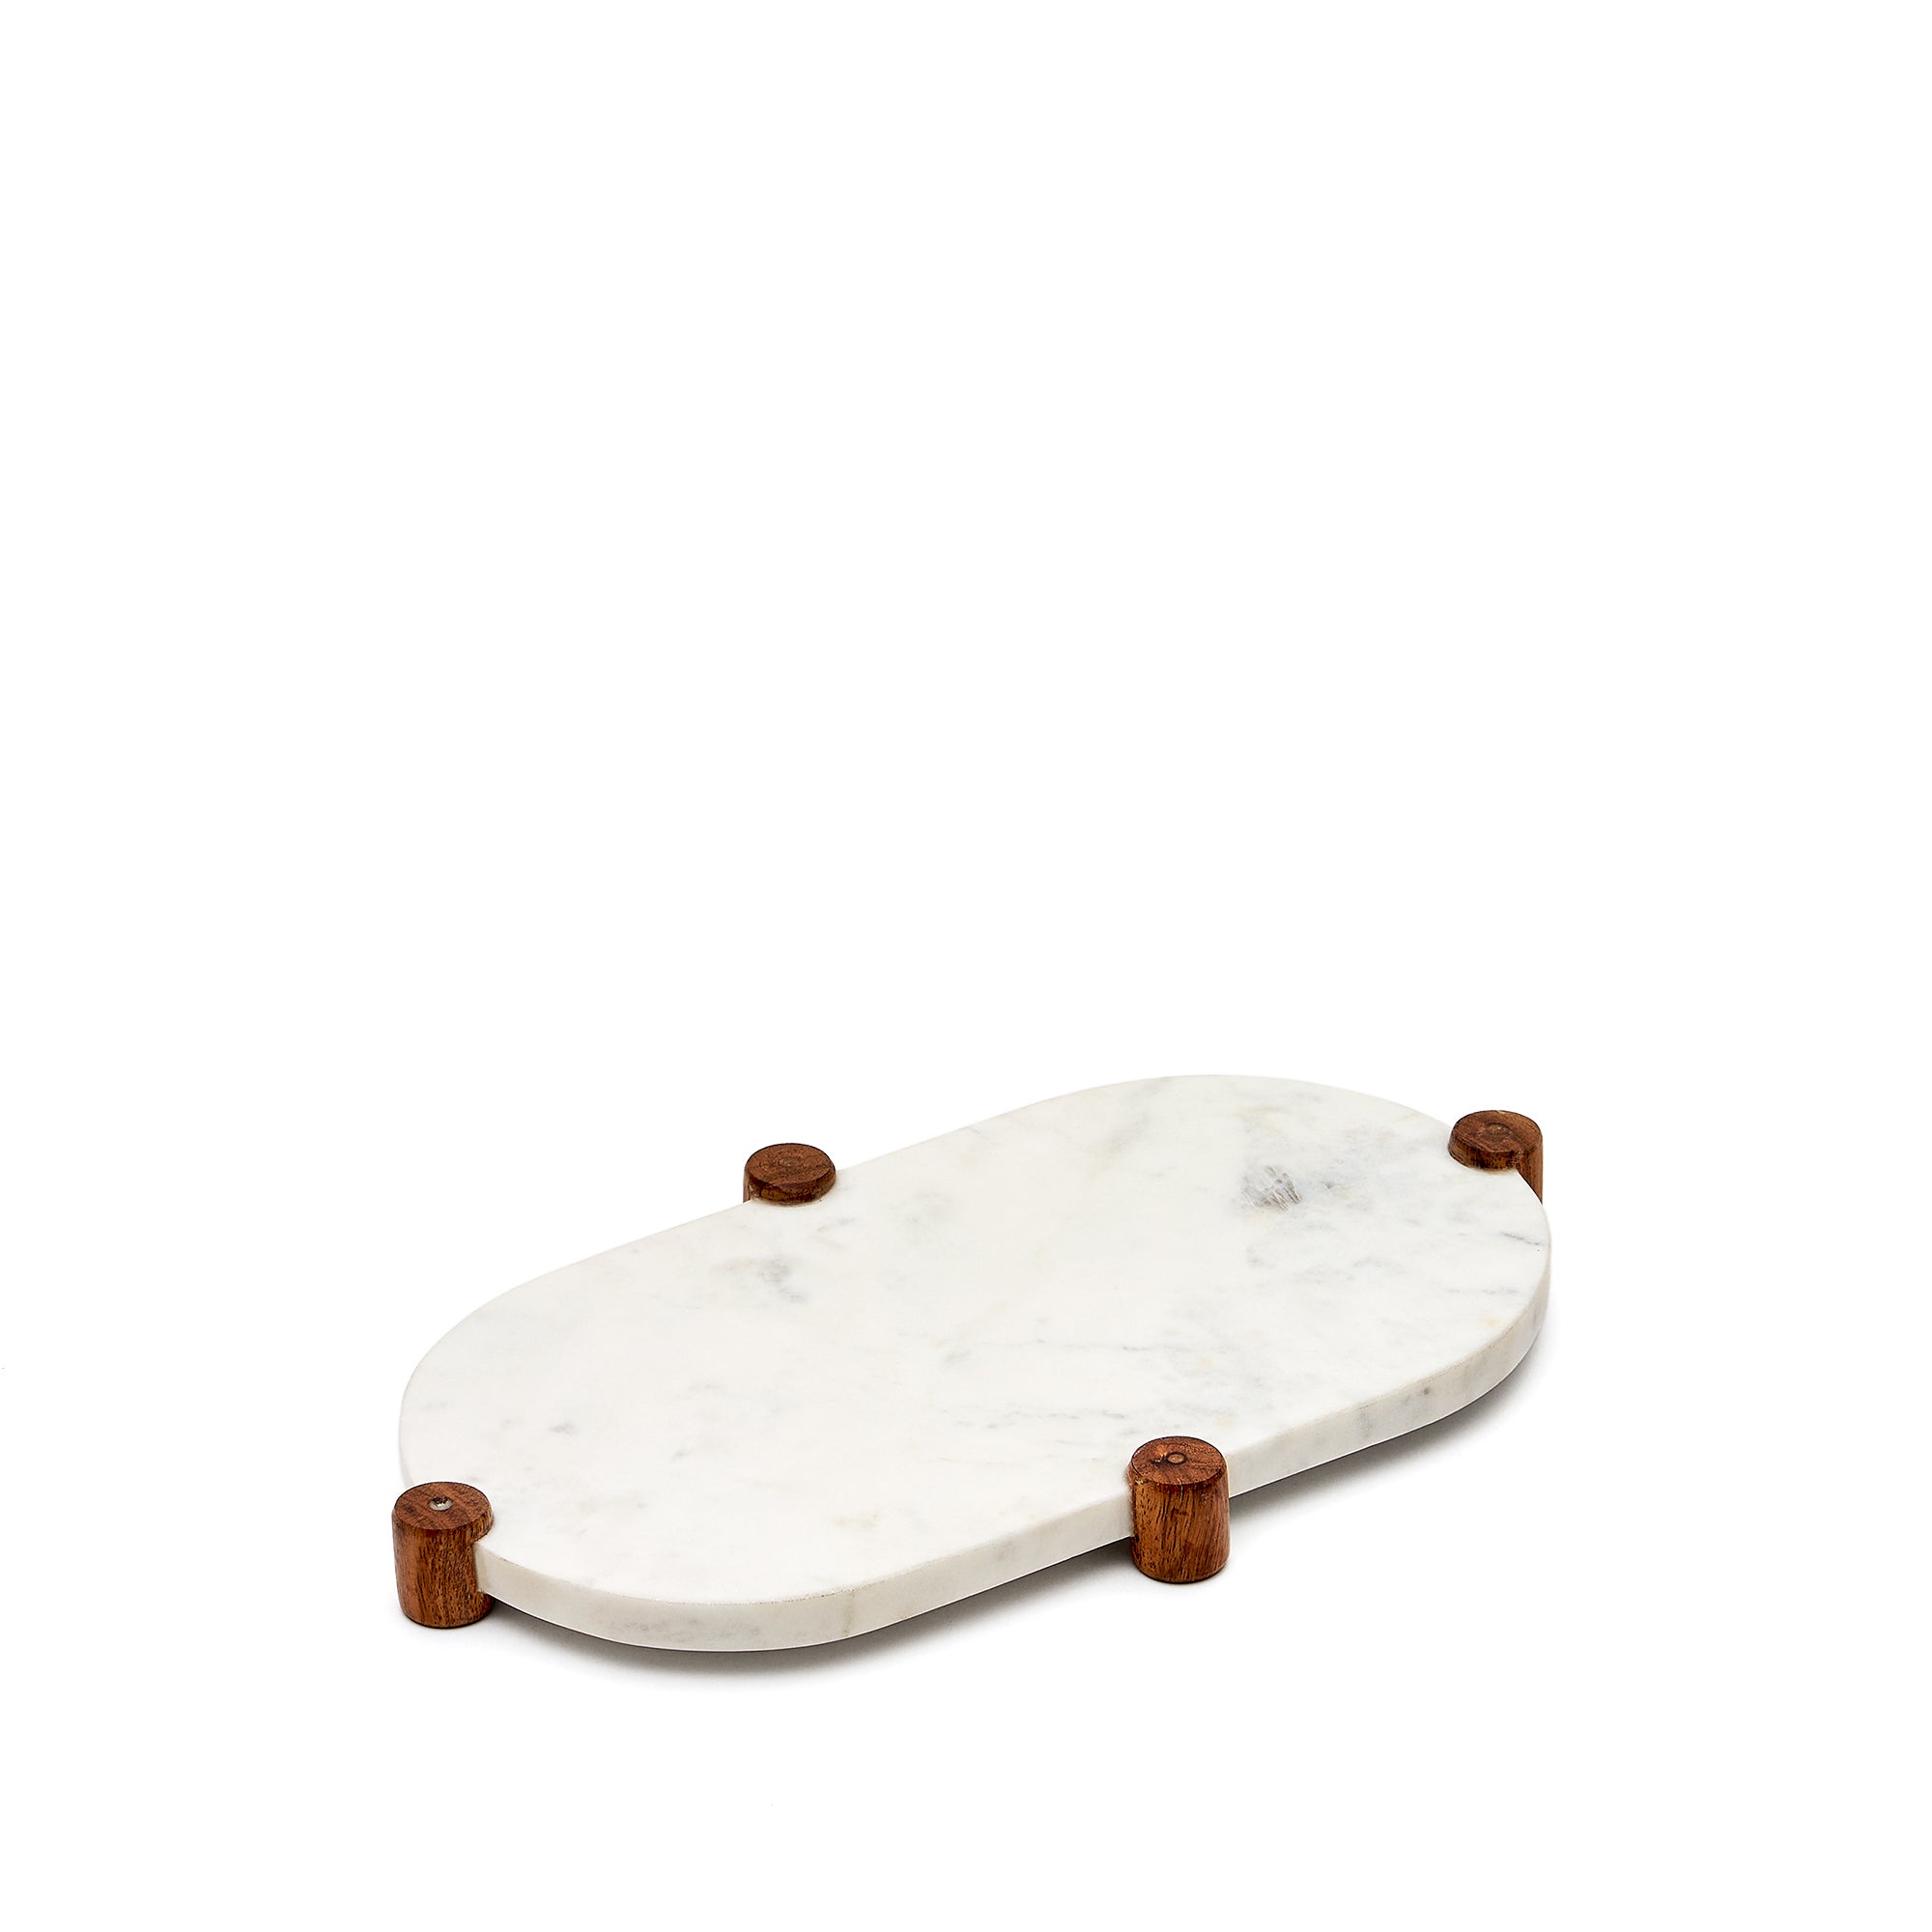 Nelma serving board in white marble and solid acacia wood